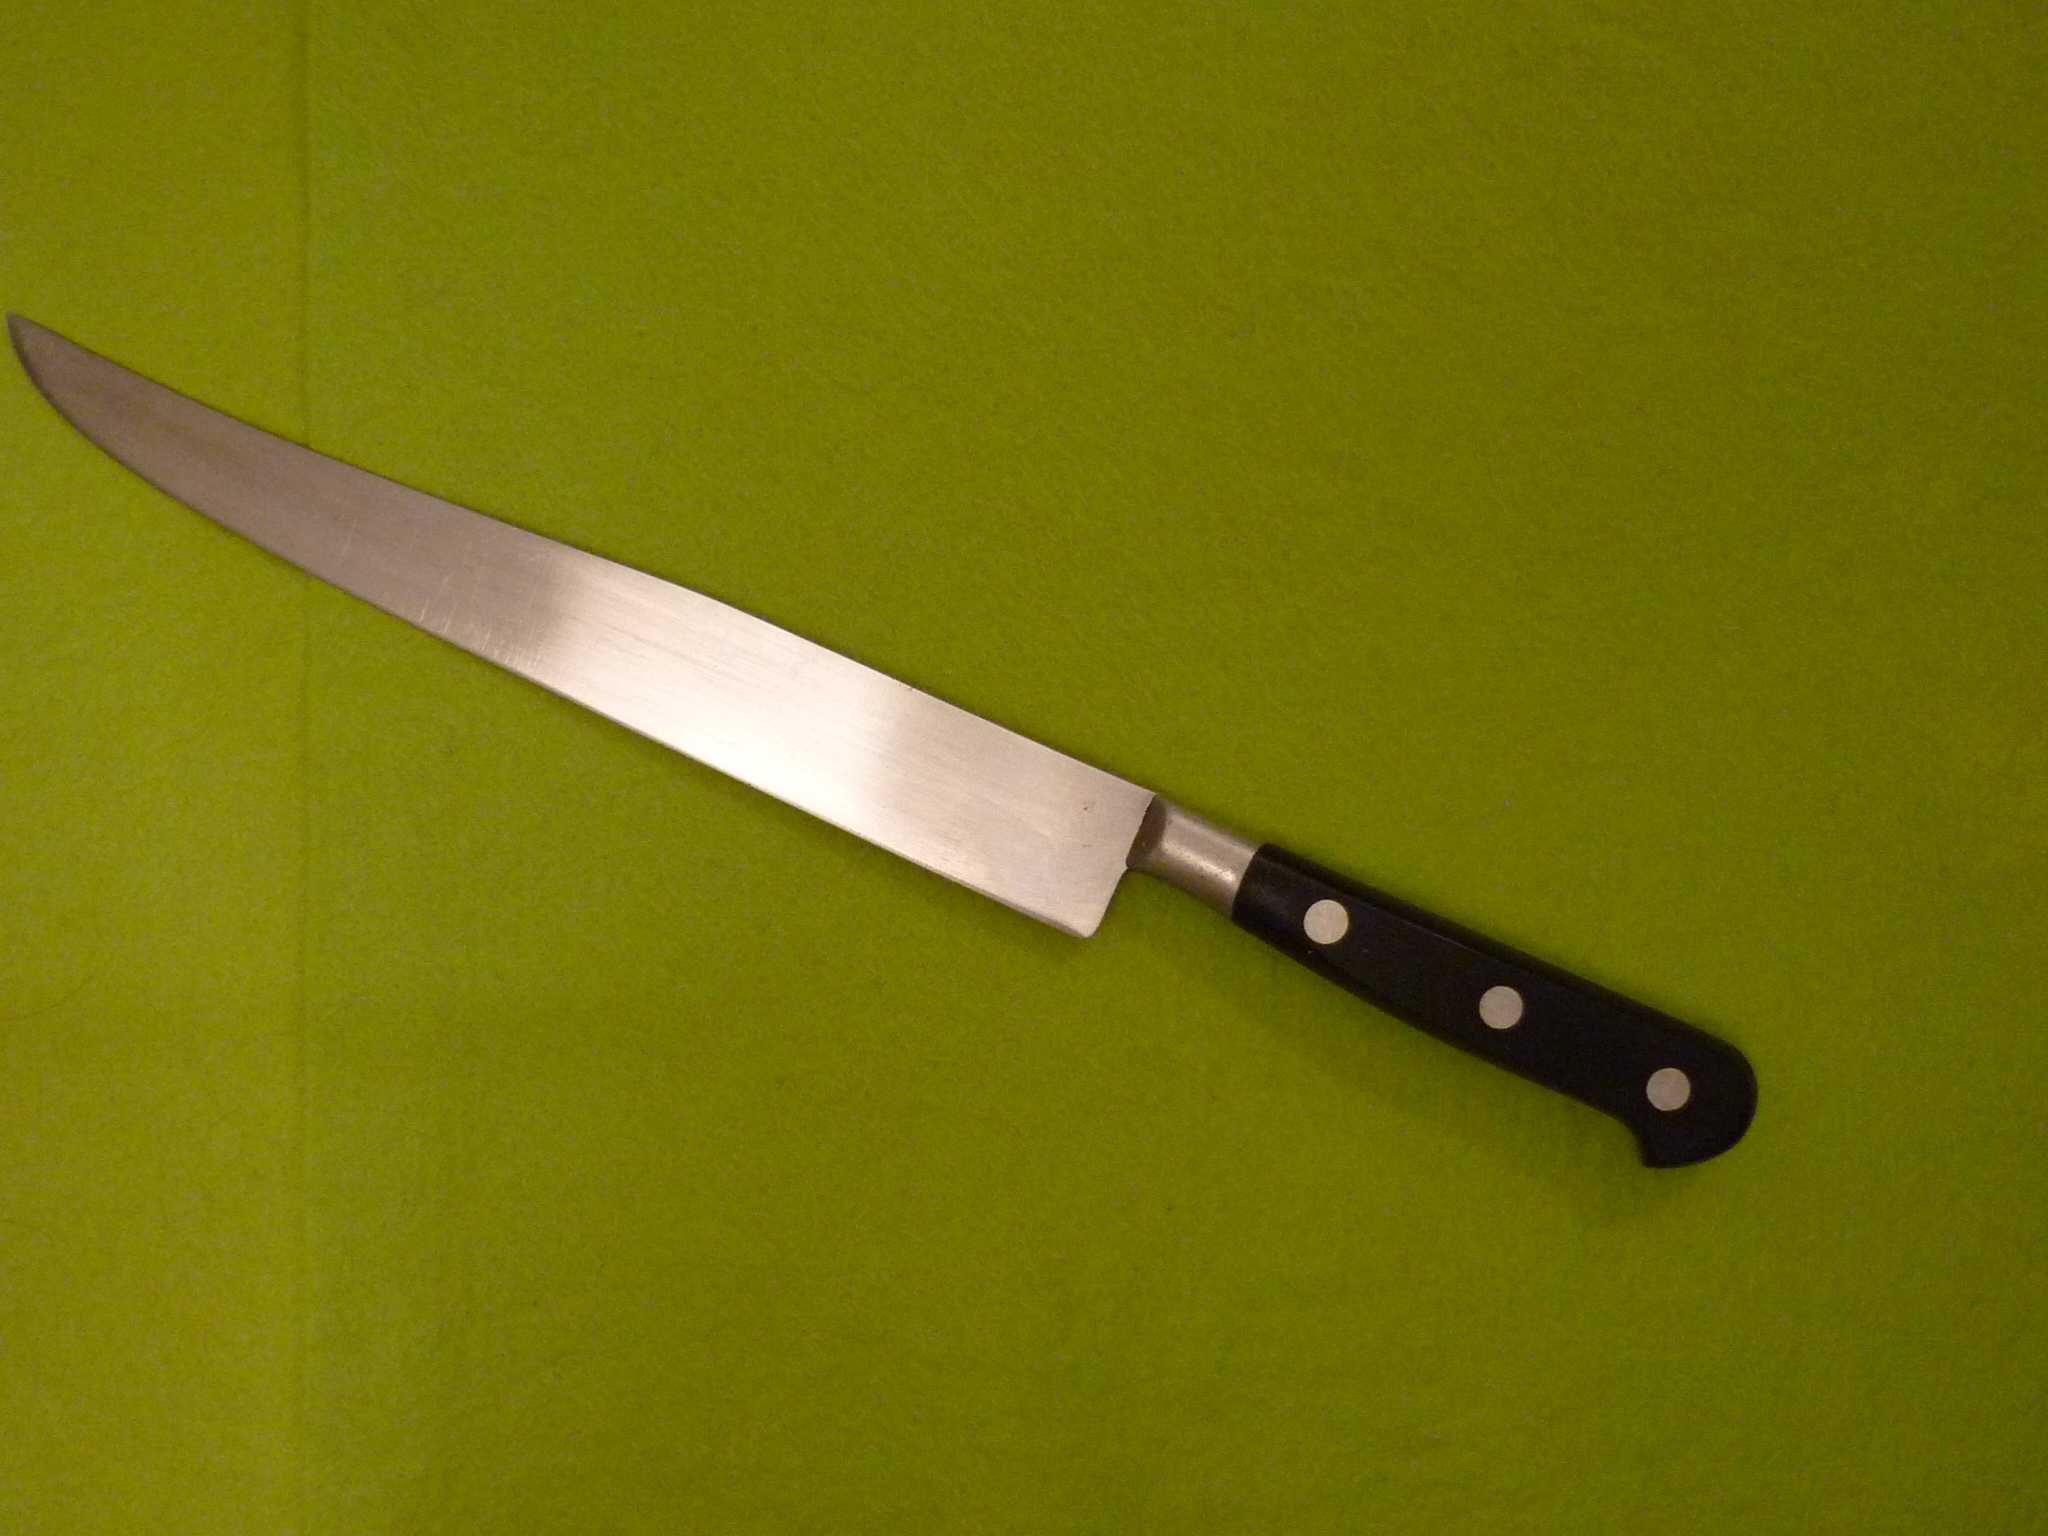 Kitchen knife image classifcation dataset for machine learning